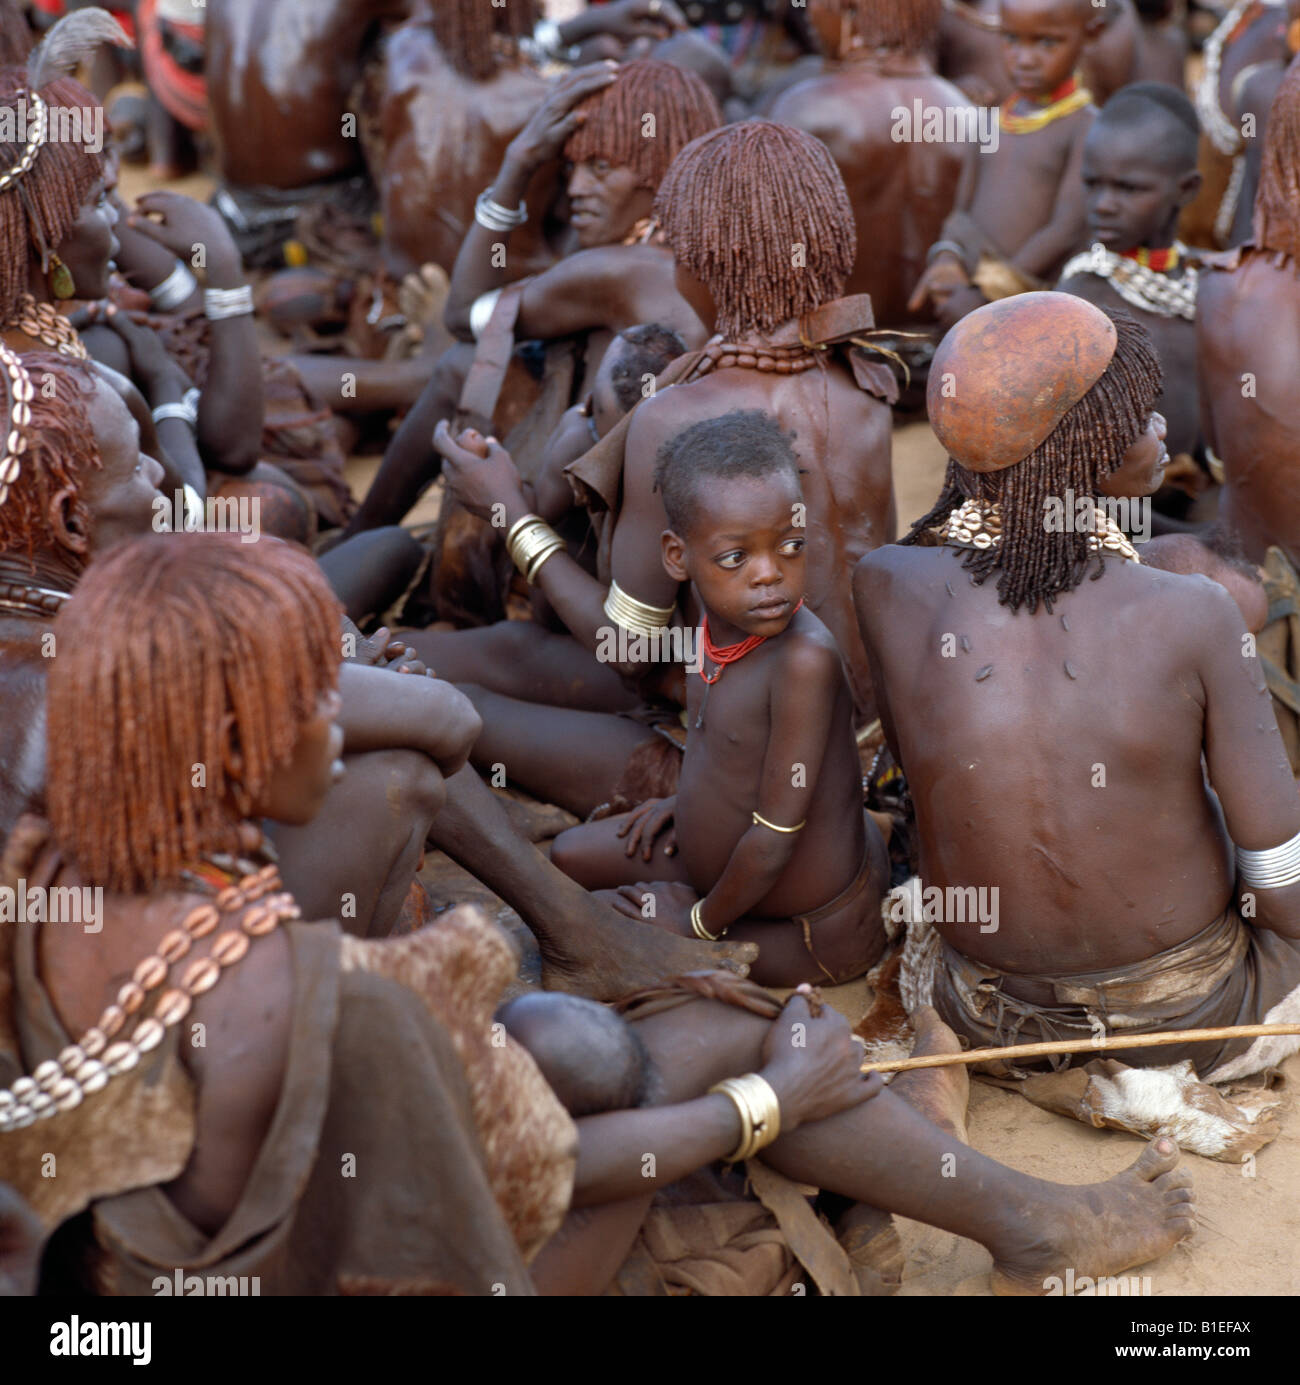 A large gathering of people at Dimeka, the largest market in the Hamar country of Southwest Ethiopia. Stock Photo